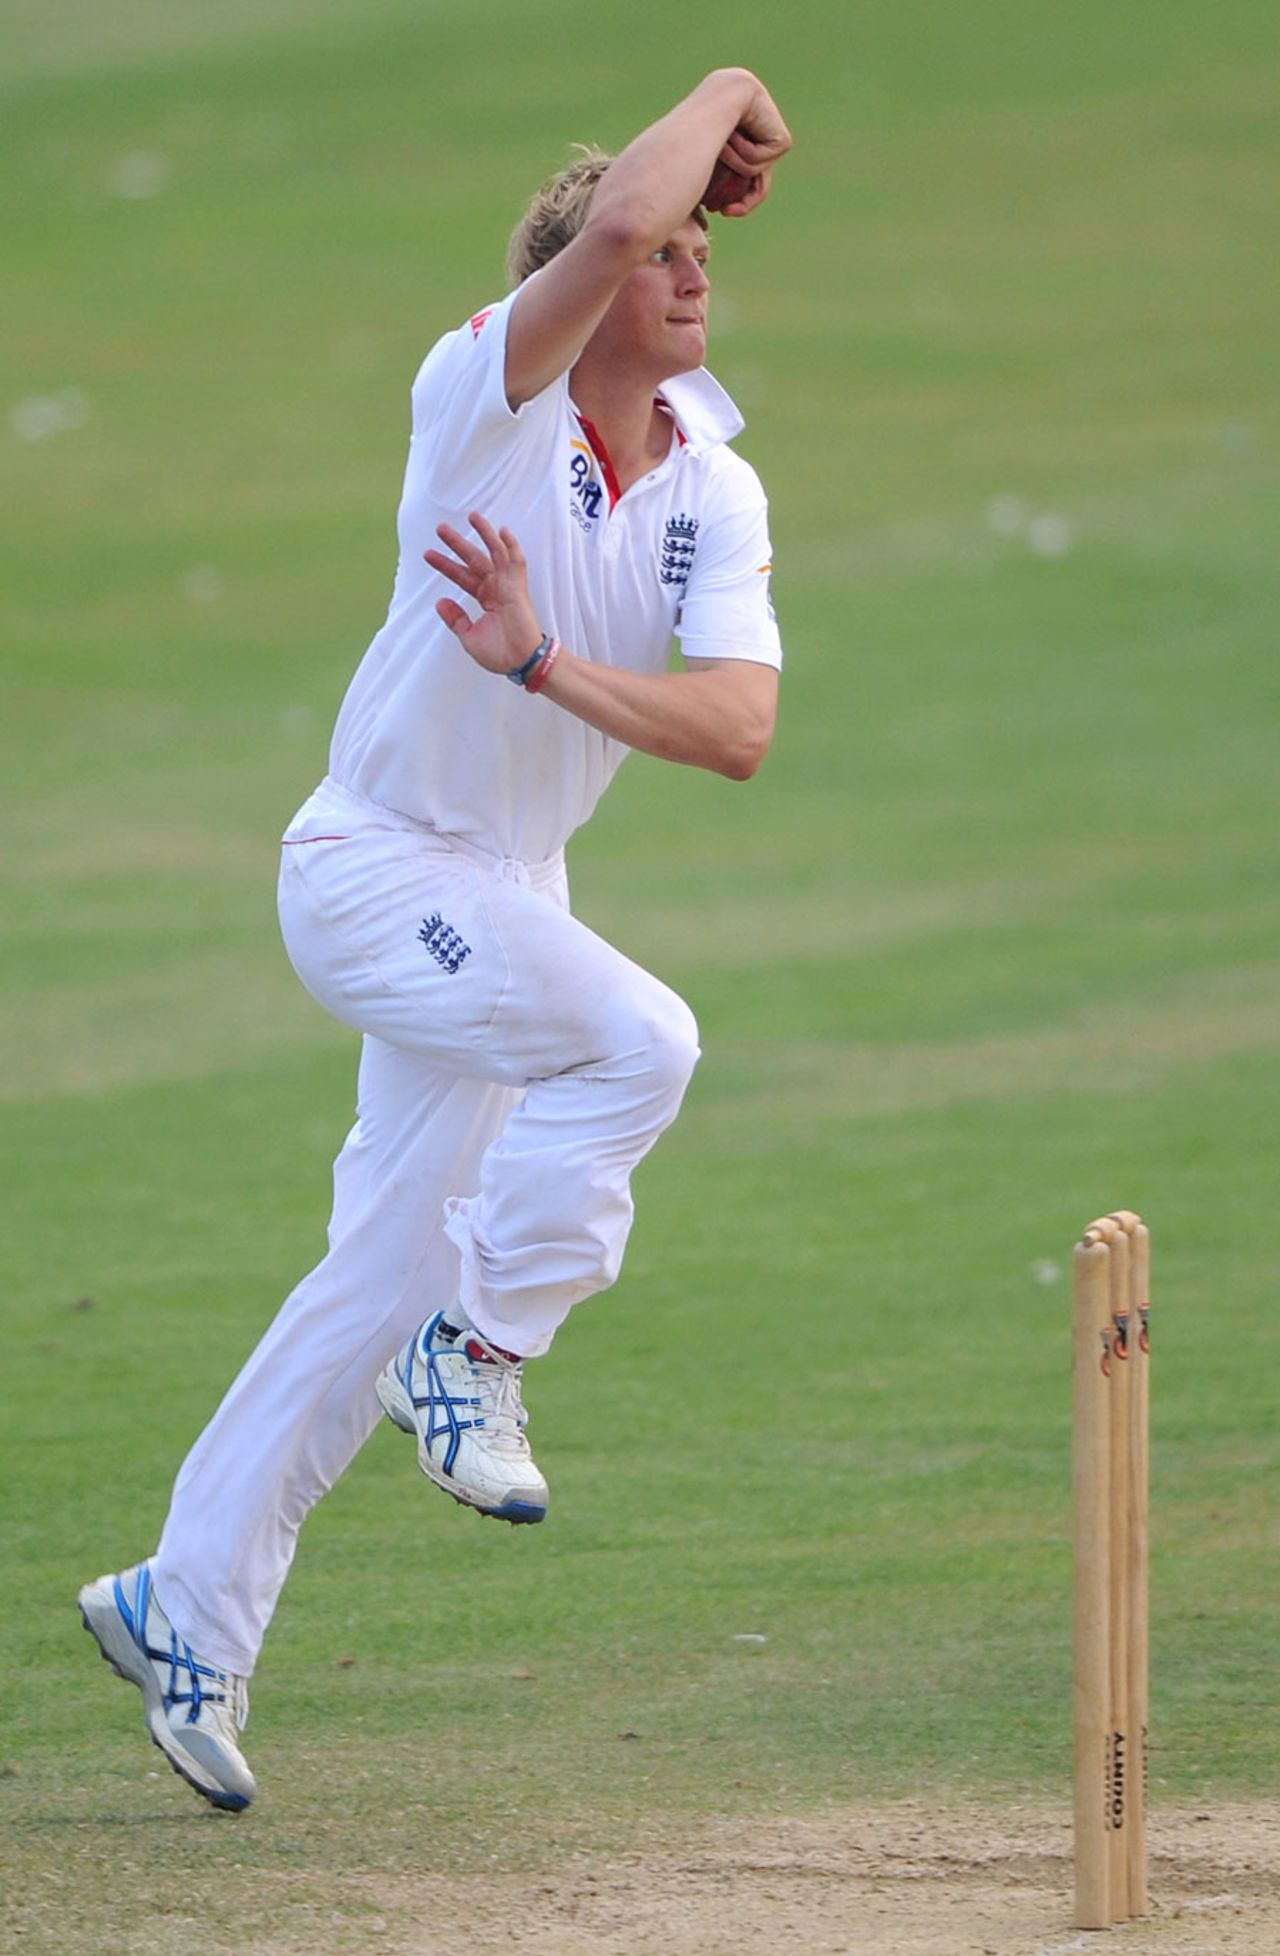 Scott Borthwick gets into his delivery stride, England Lions v Sri Lanka A, Scarborough, August 3, 2011